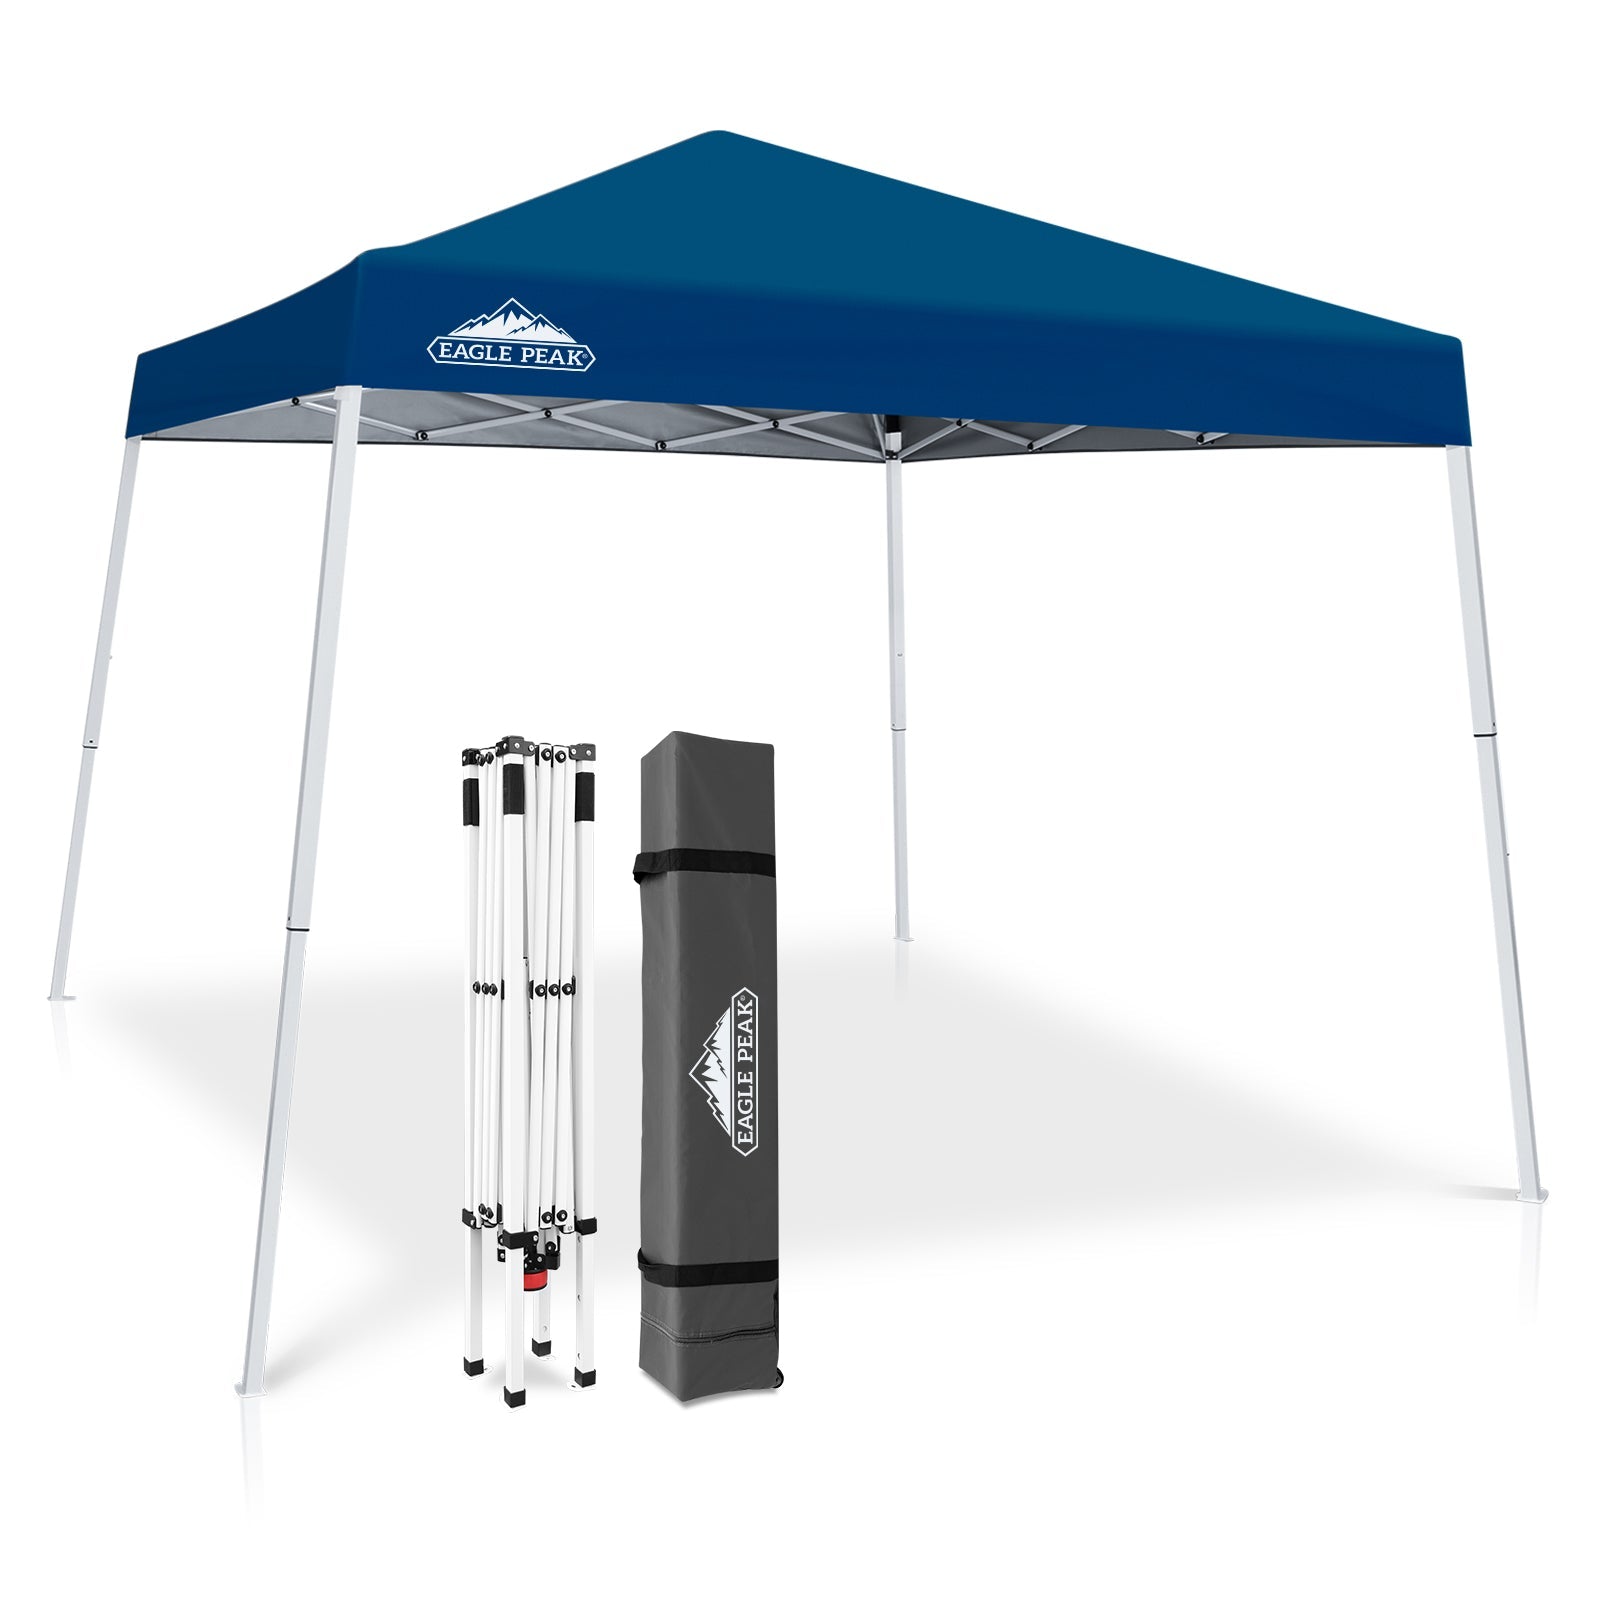 EAGLE PEAK 10' x 10' Slant Leg Pop-up Canopy Tent Easy One Person Setup Instant Outdoor Canopy Folding Shelter with 64 Square Feet of Shade (Dark Blue)